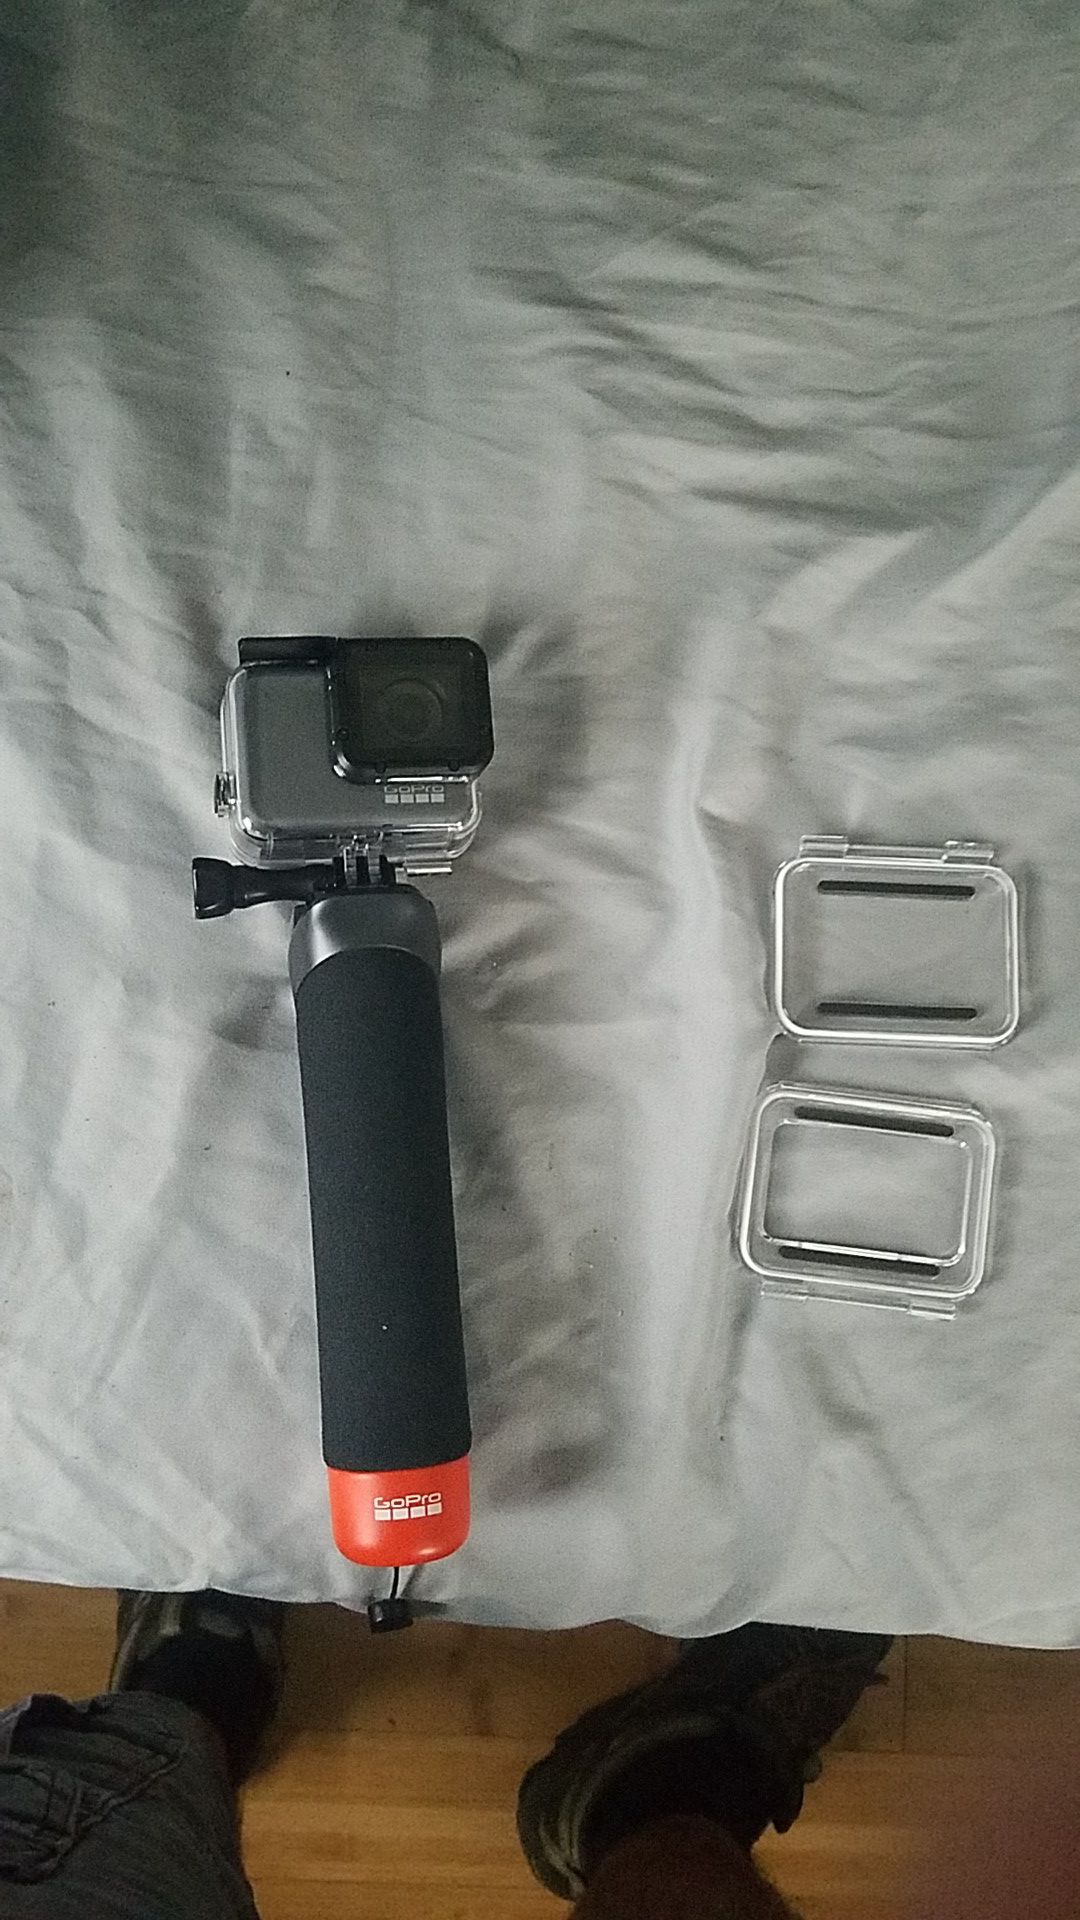 Gopro hero 7 trade for go cart or rc cars